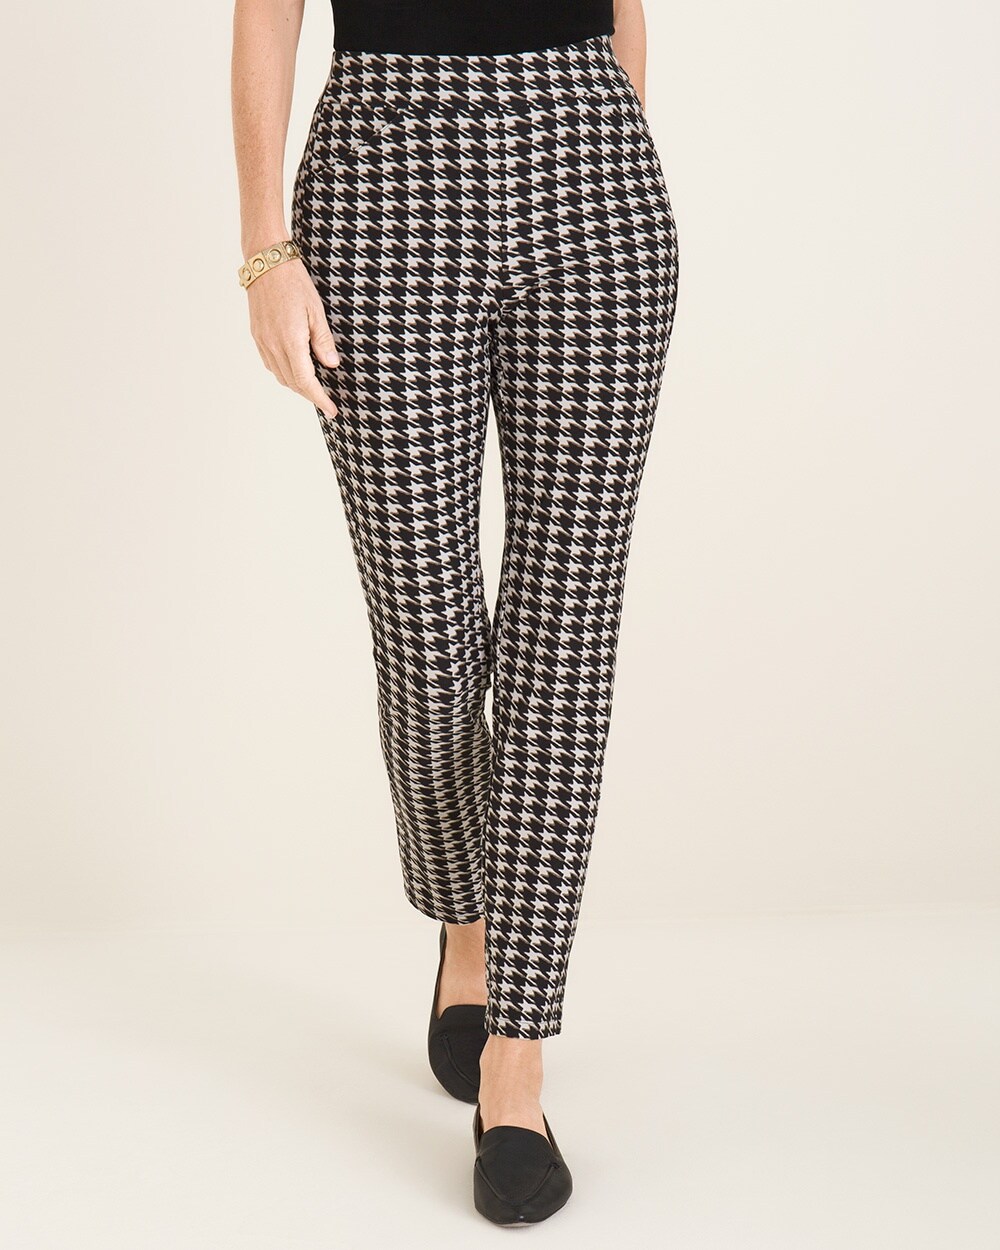 Travelers Collection Printed Black and Ecru Crepe Ankle Pants